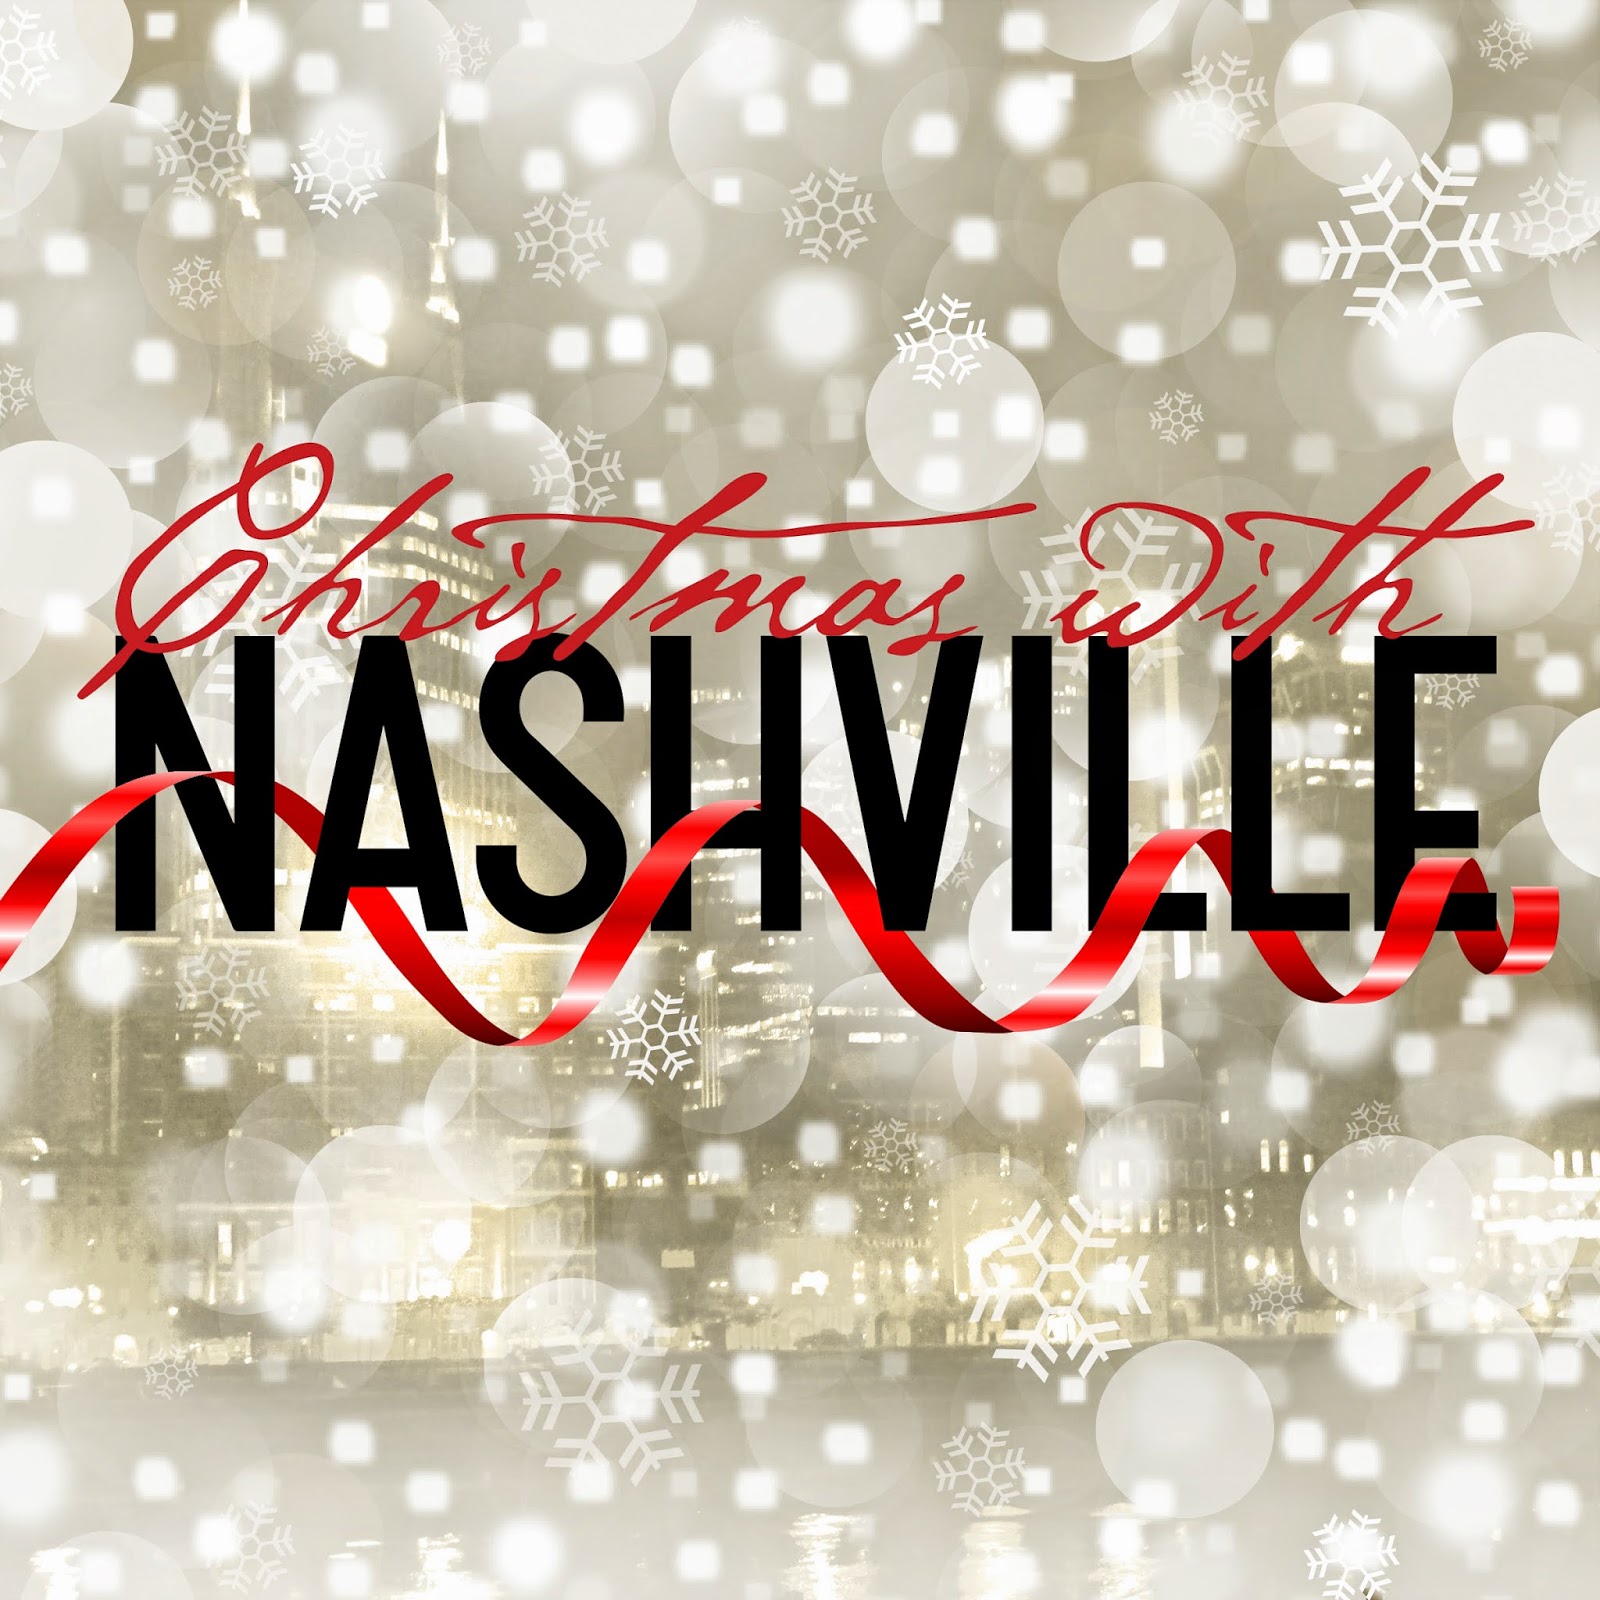 http://discover.halifaxpubliclibraries.ca/?q=title:christmas%20with%20nashville